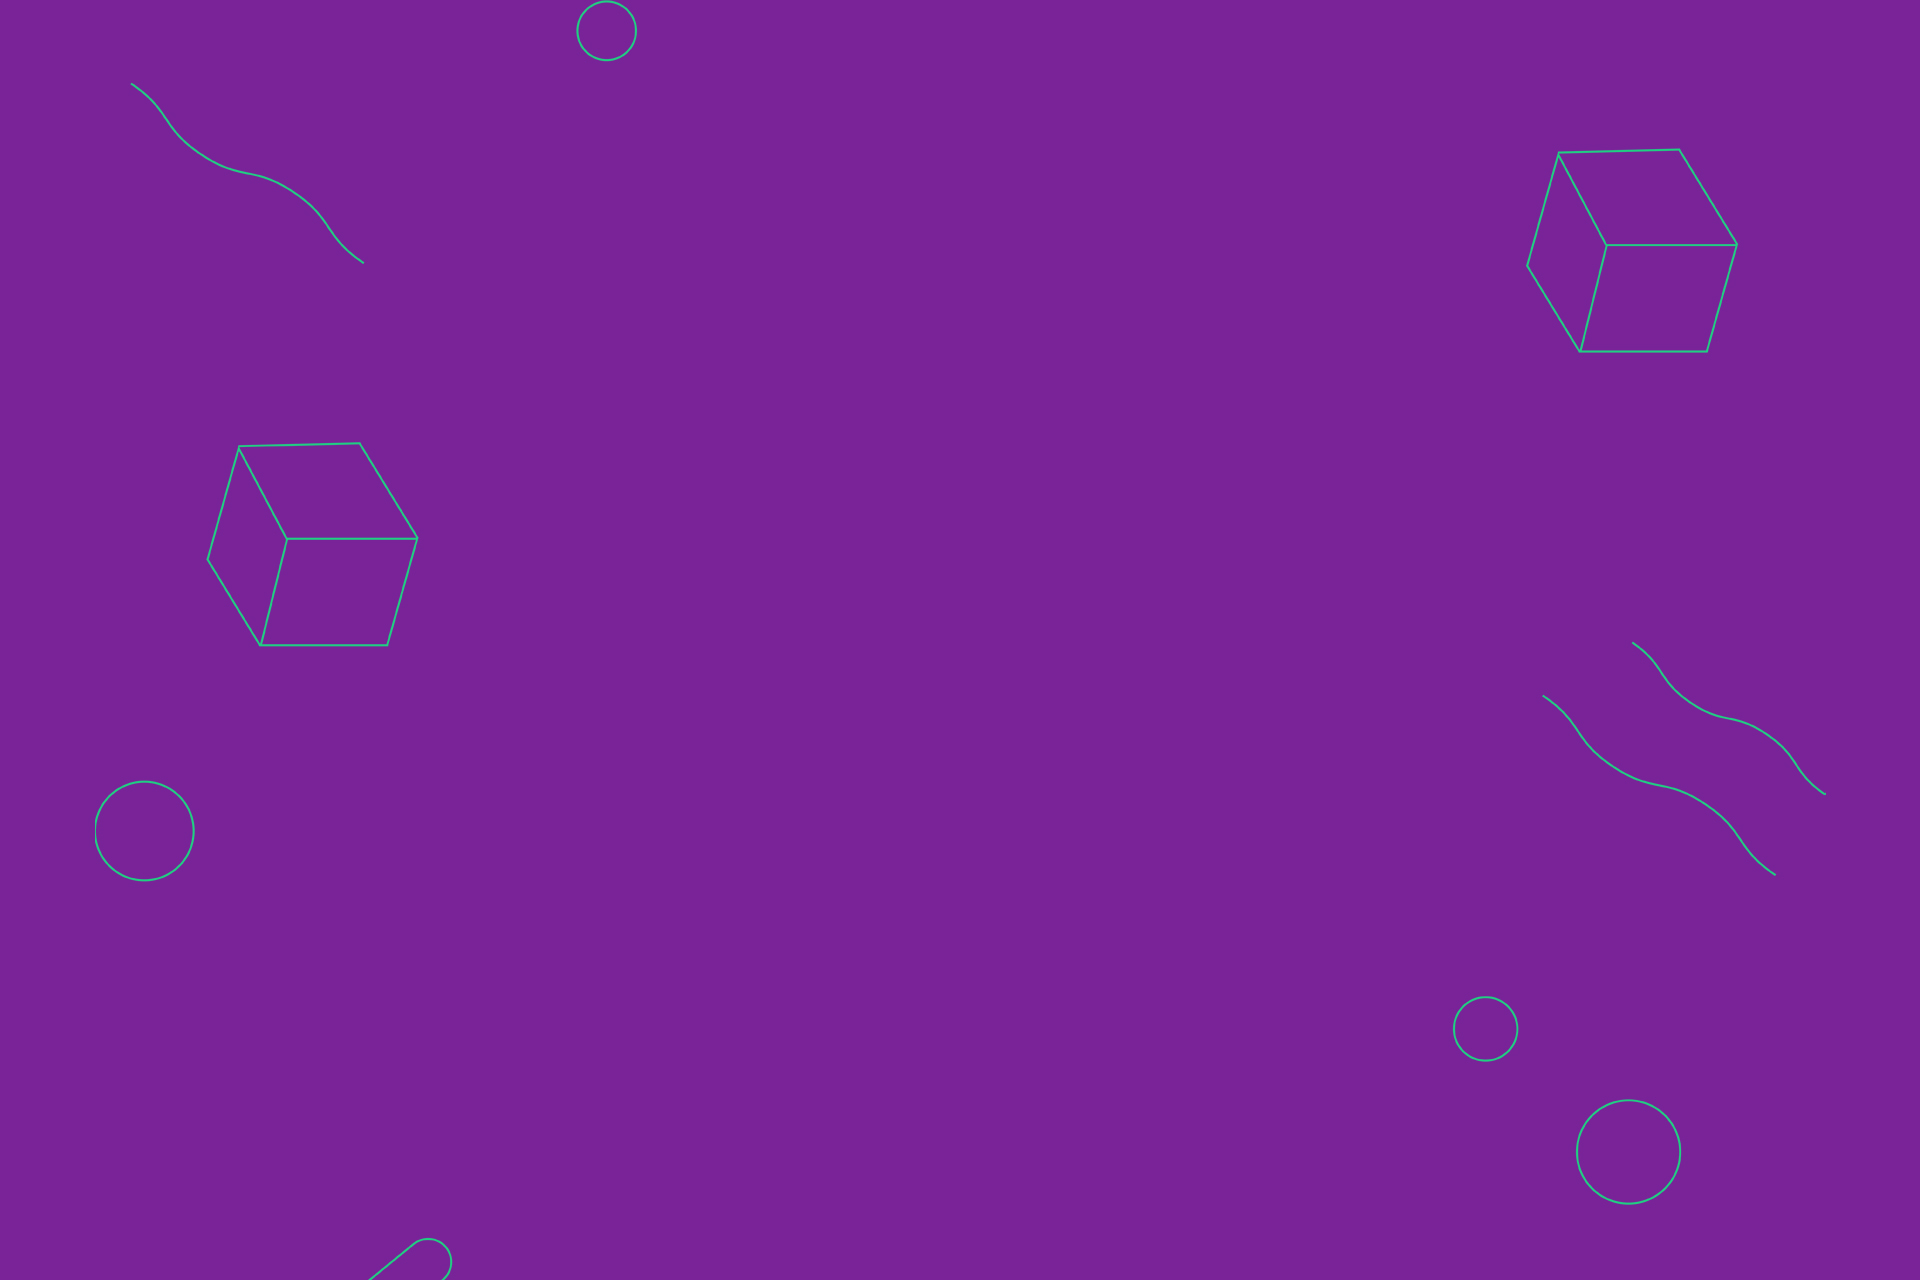 Green graphic elements on purple background